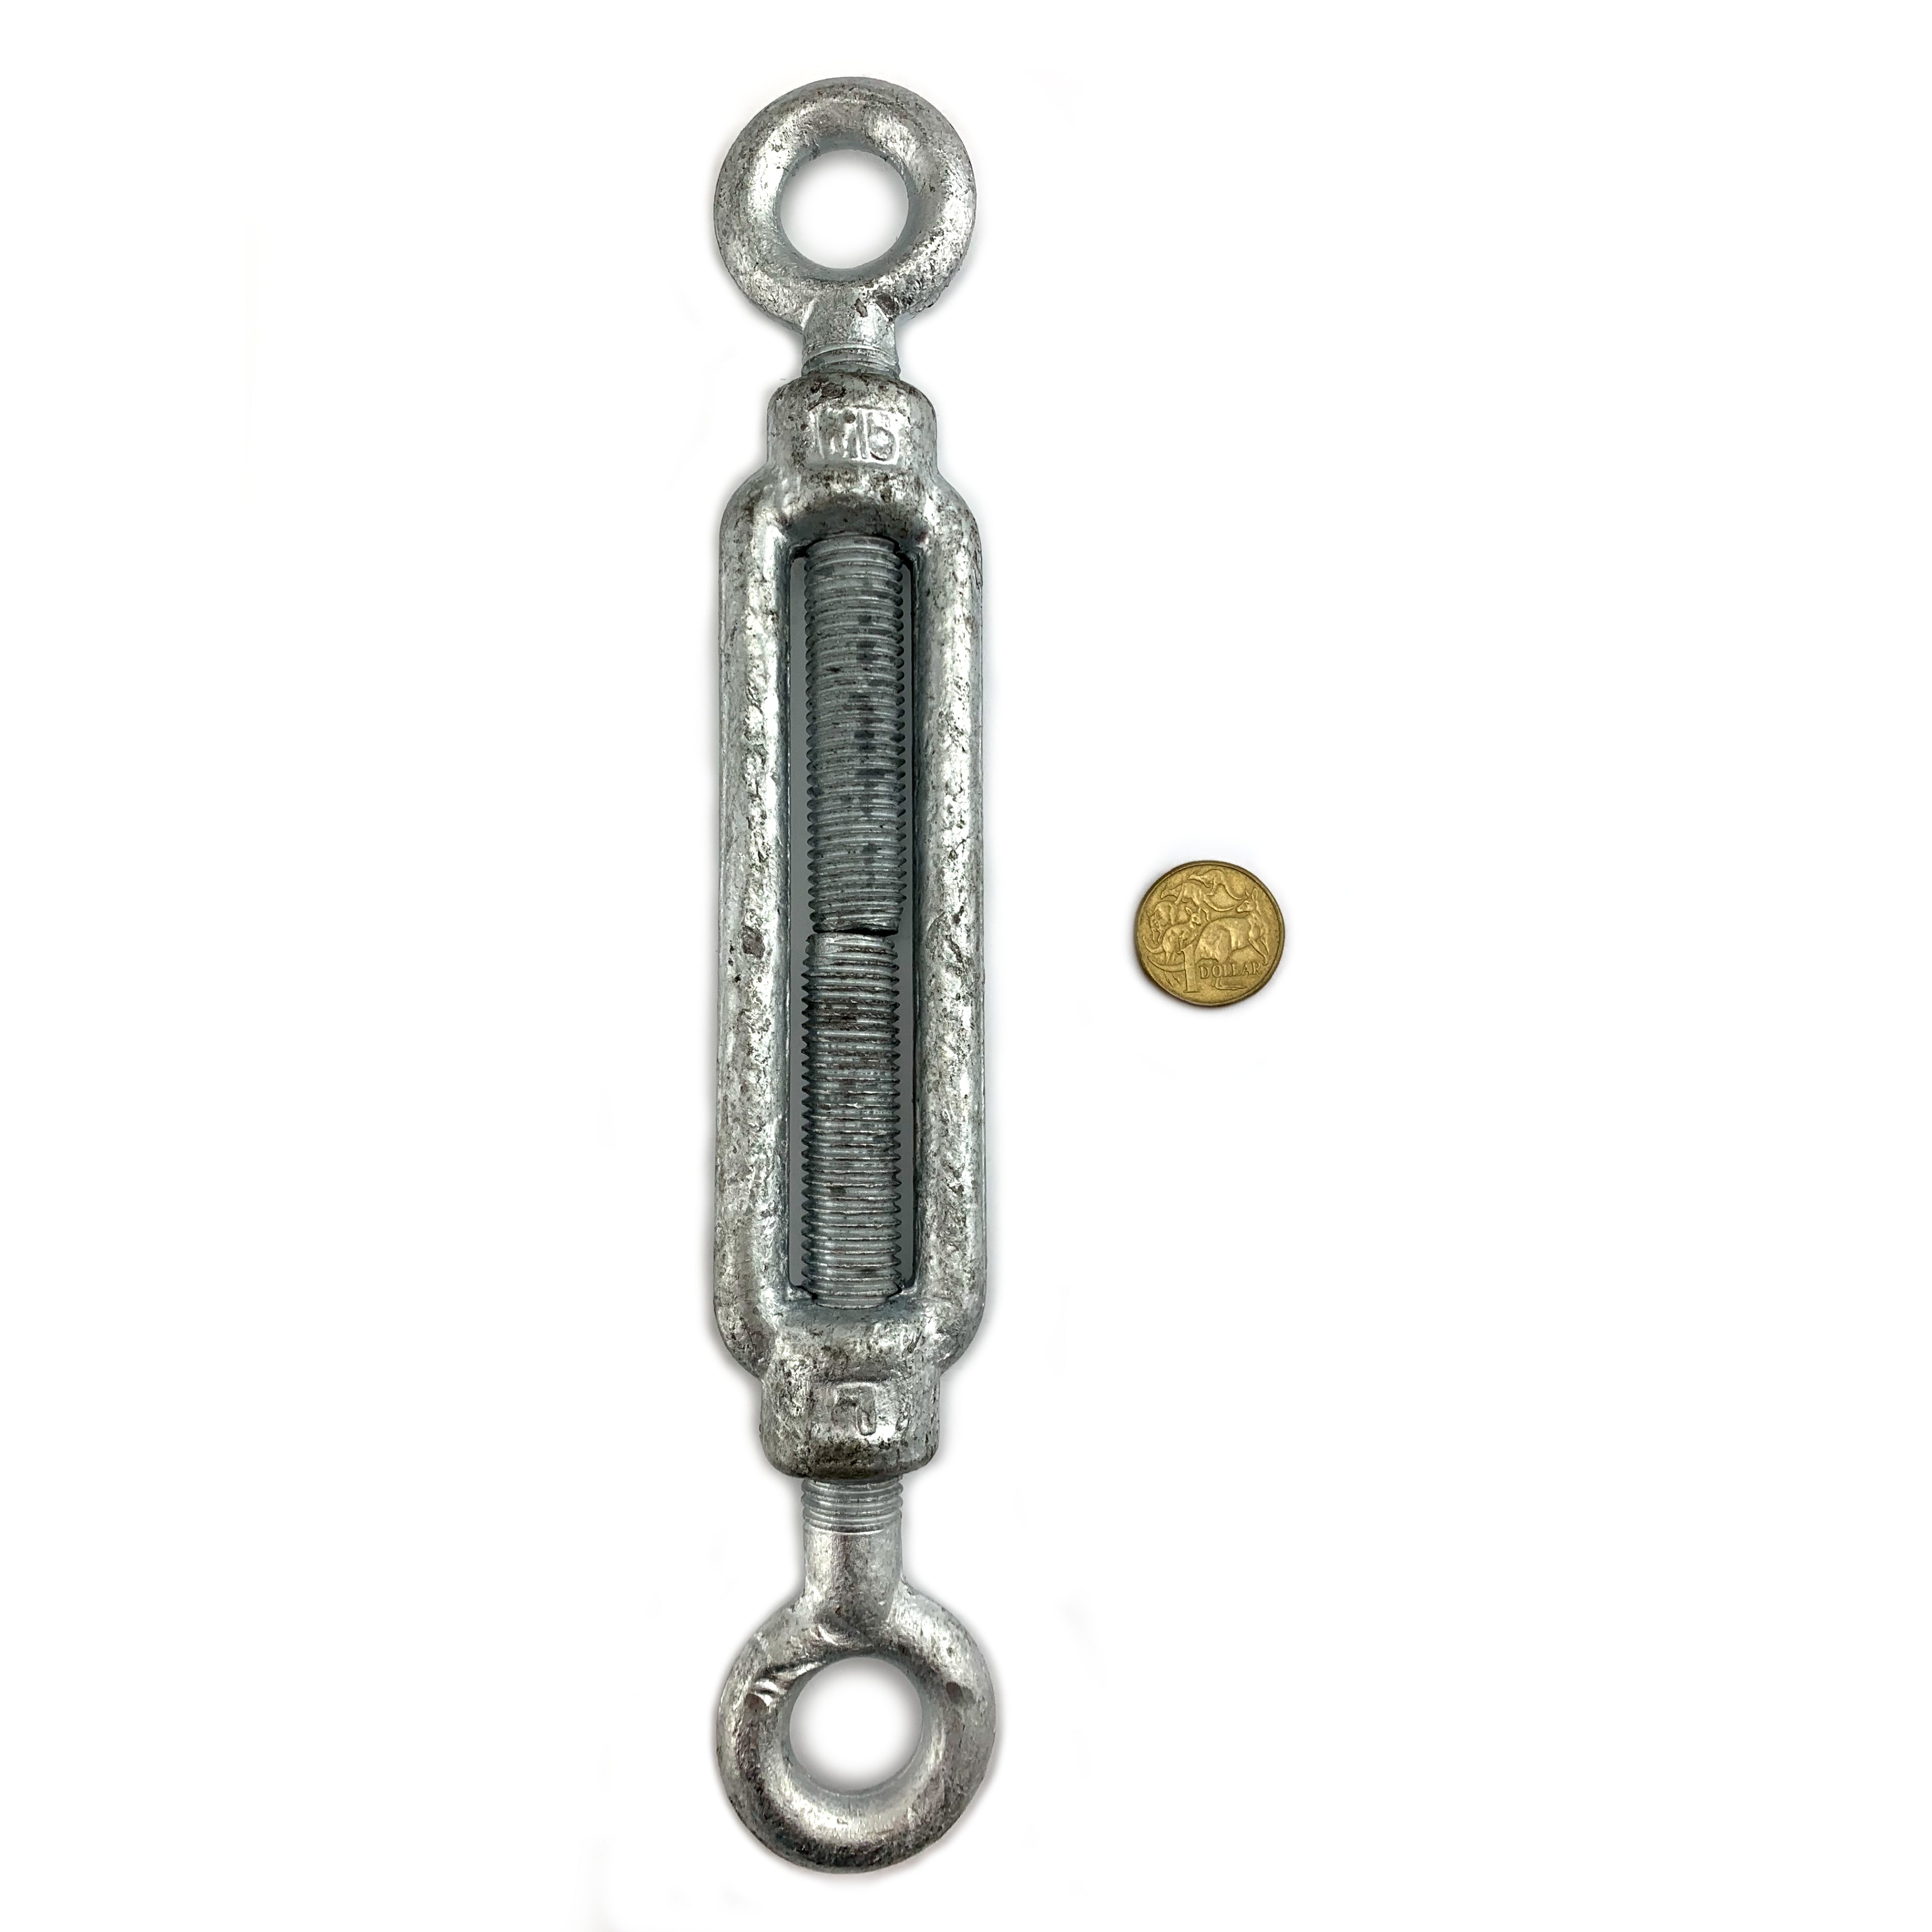 16mm Eye-Eye Turnbuckle Galvanised. Shop hardware online chain.com.au. Australia wide delivery & Melbourne click & collect.